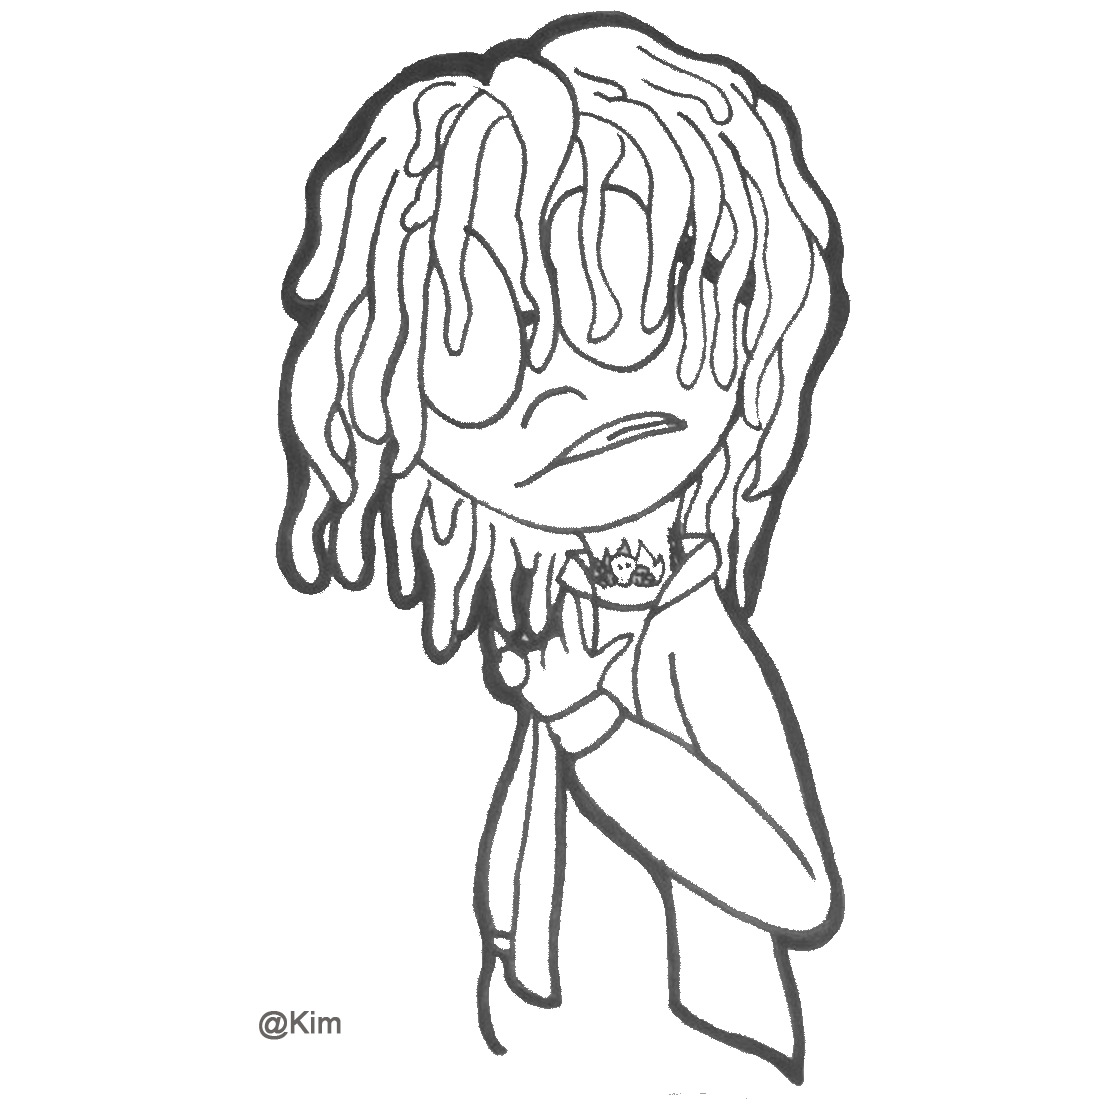 Free Cartoon Lil Pump Coloring Pages printable